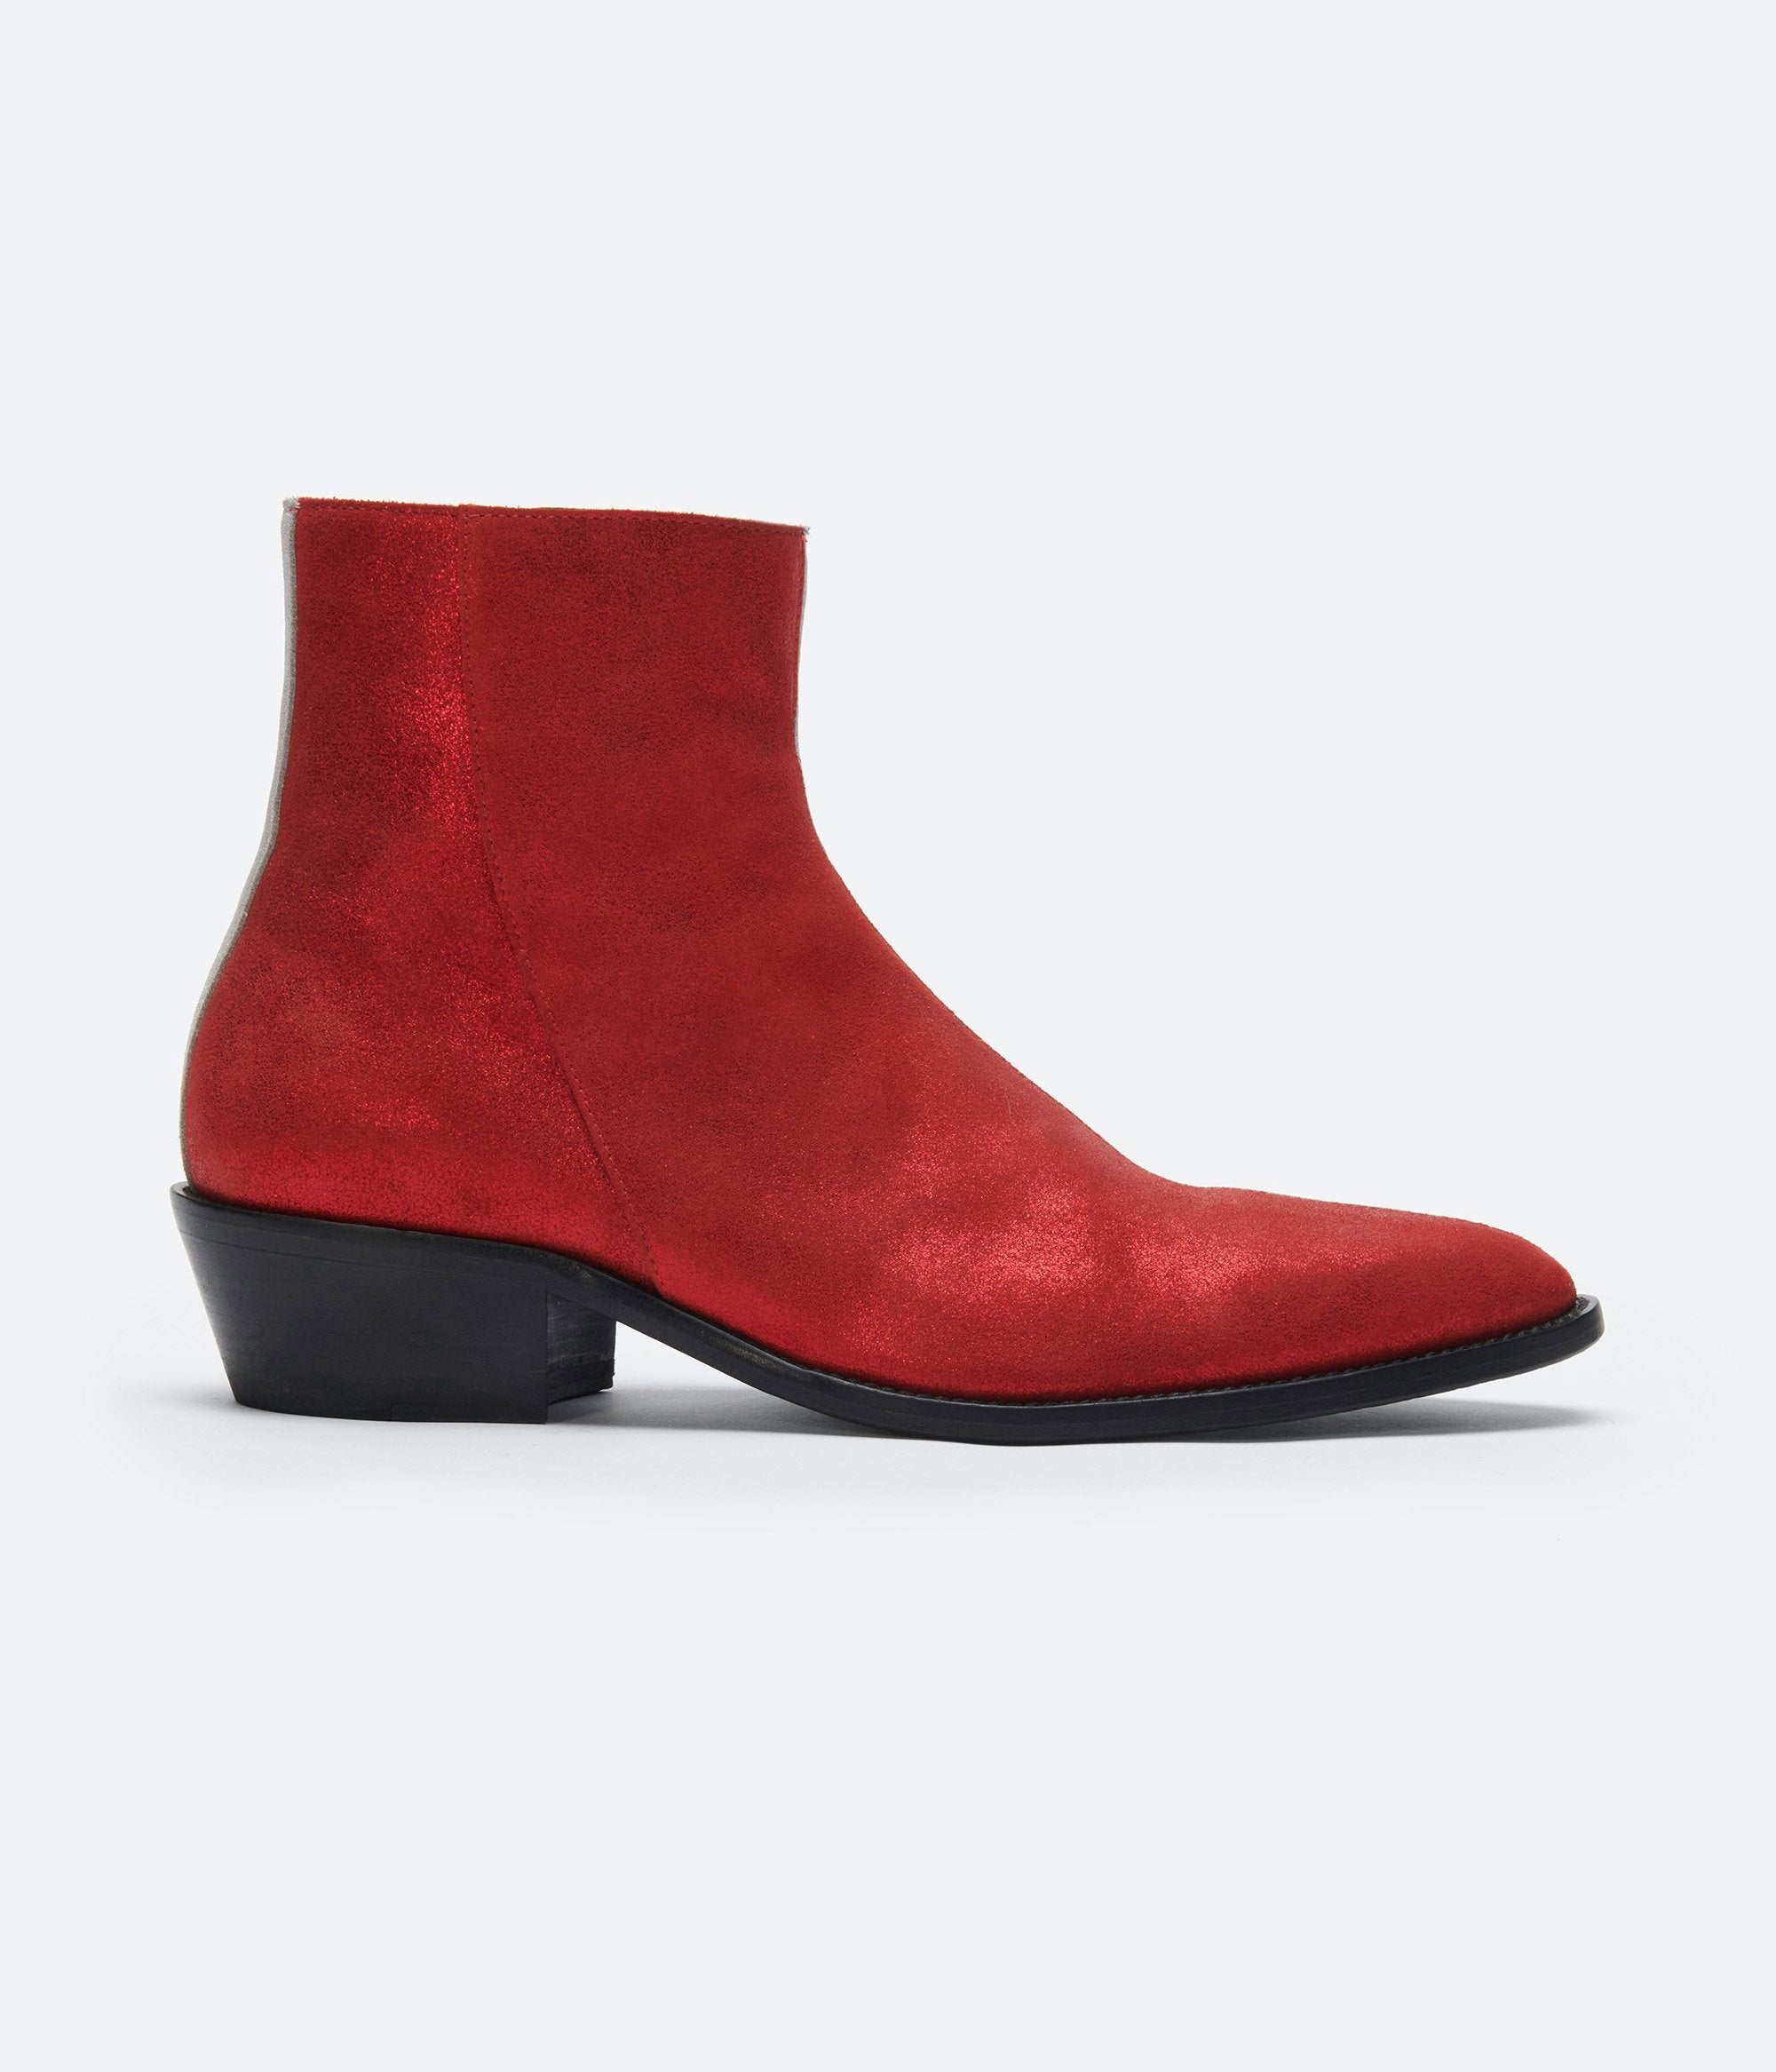 HUMAN RECREATIONAL SERVICES LUTHER BOOT IN RED AND GREY ITALIAN LEATHER